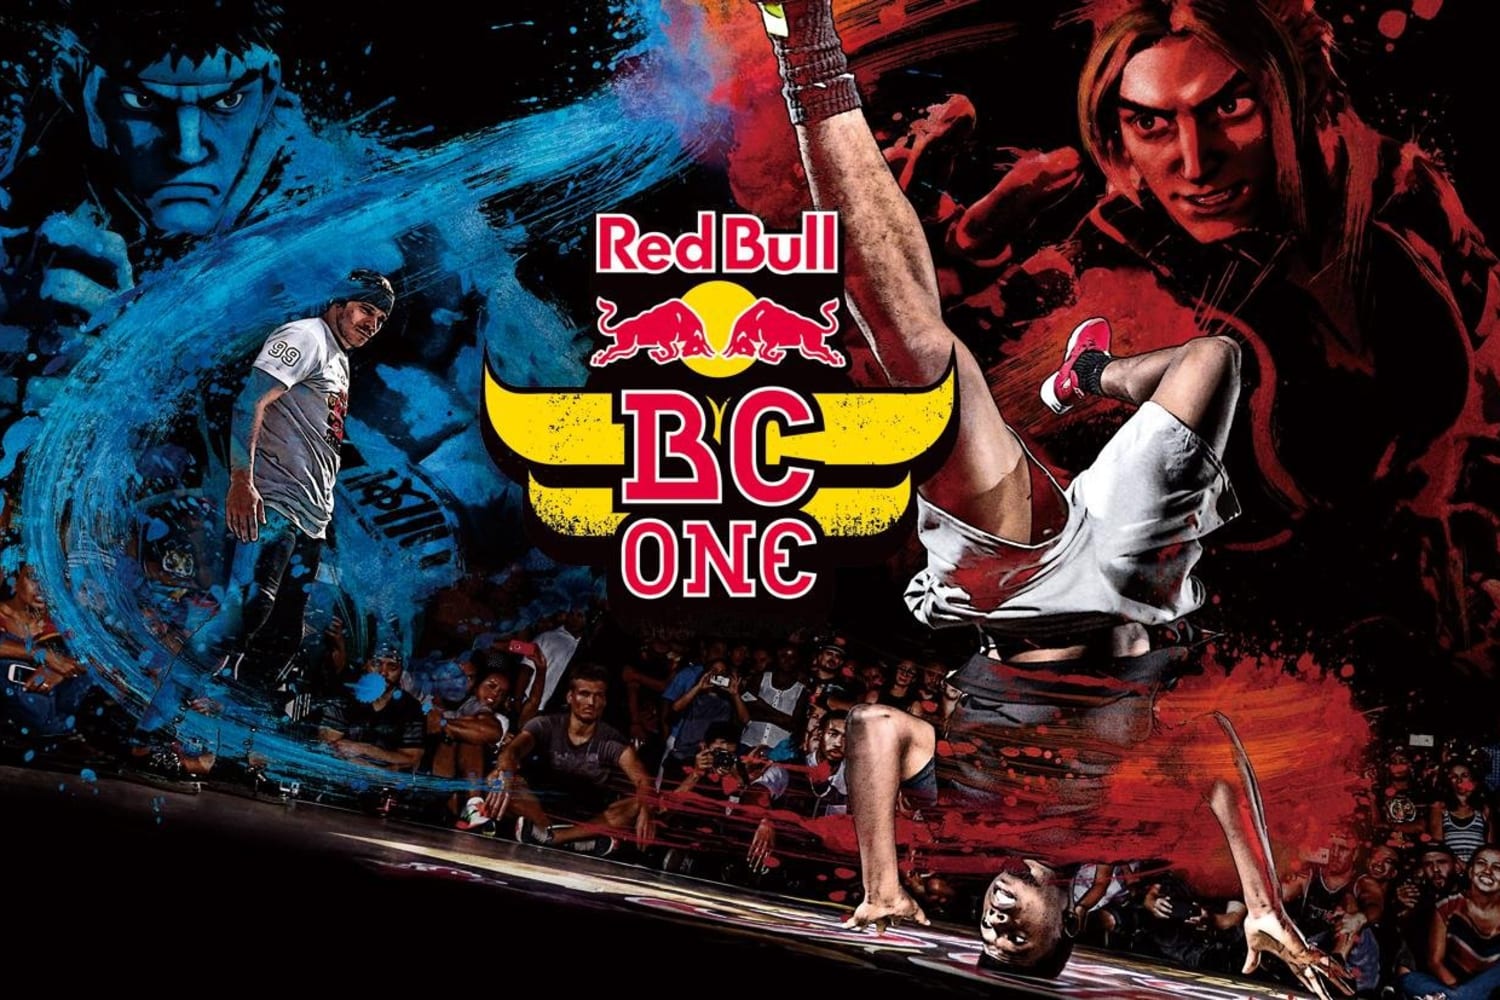 Red Bull BC One & Street Fighter collaboration *video*